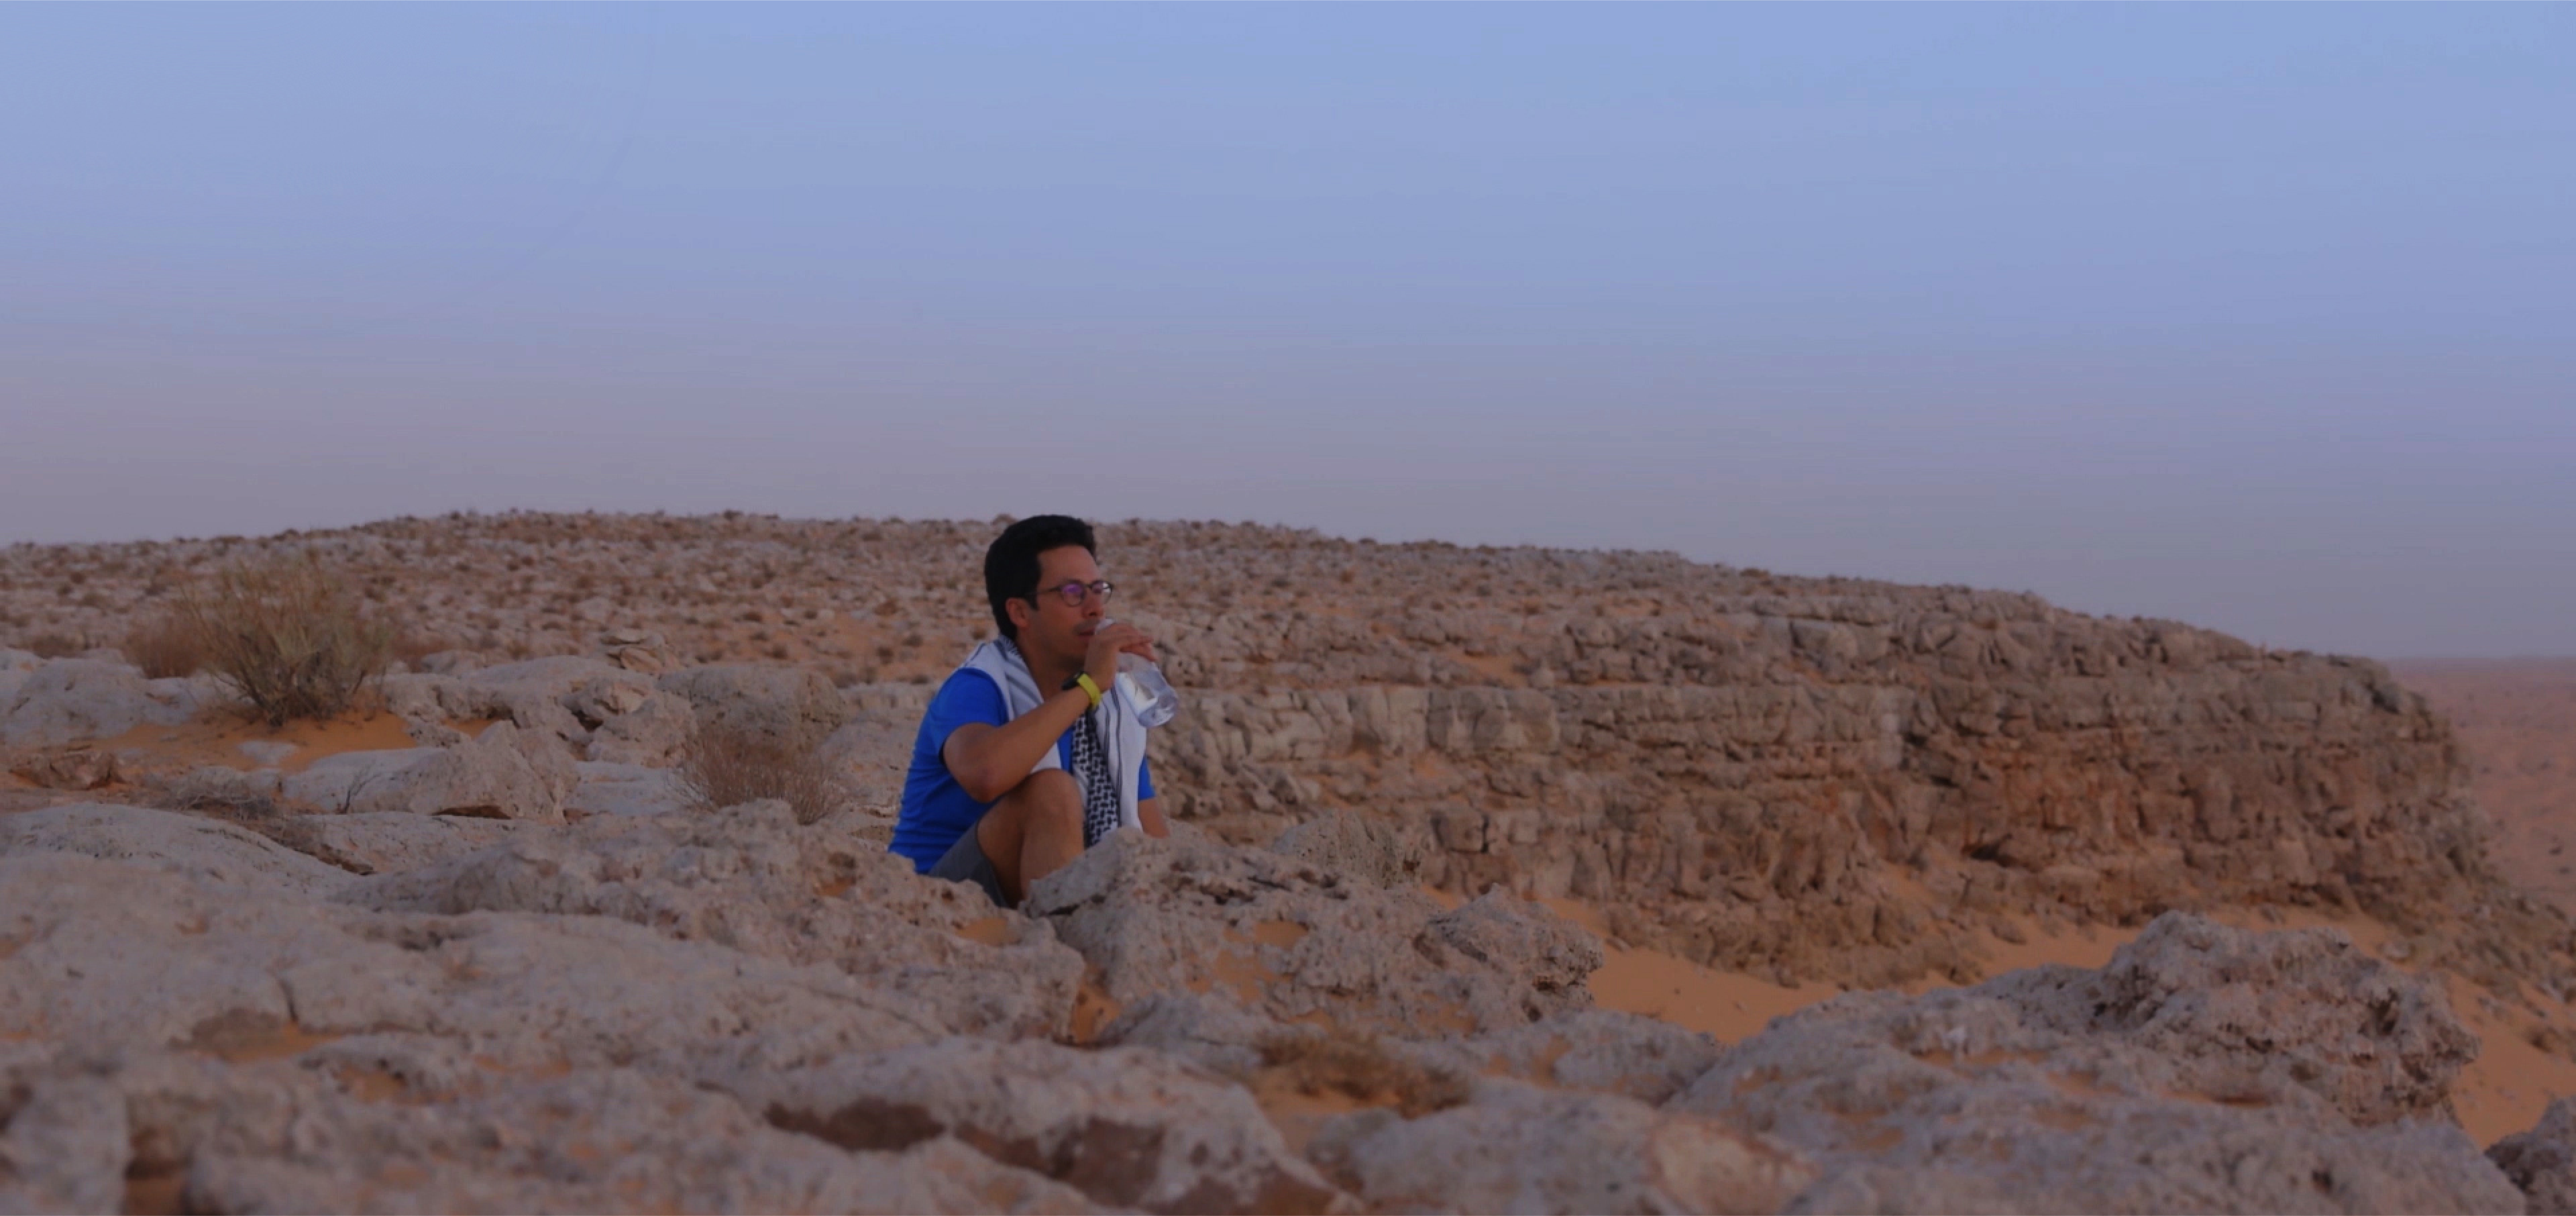 Hedi sitting in a rocky part of the desert, drinking water looking atsunrise.